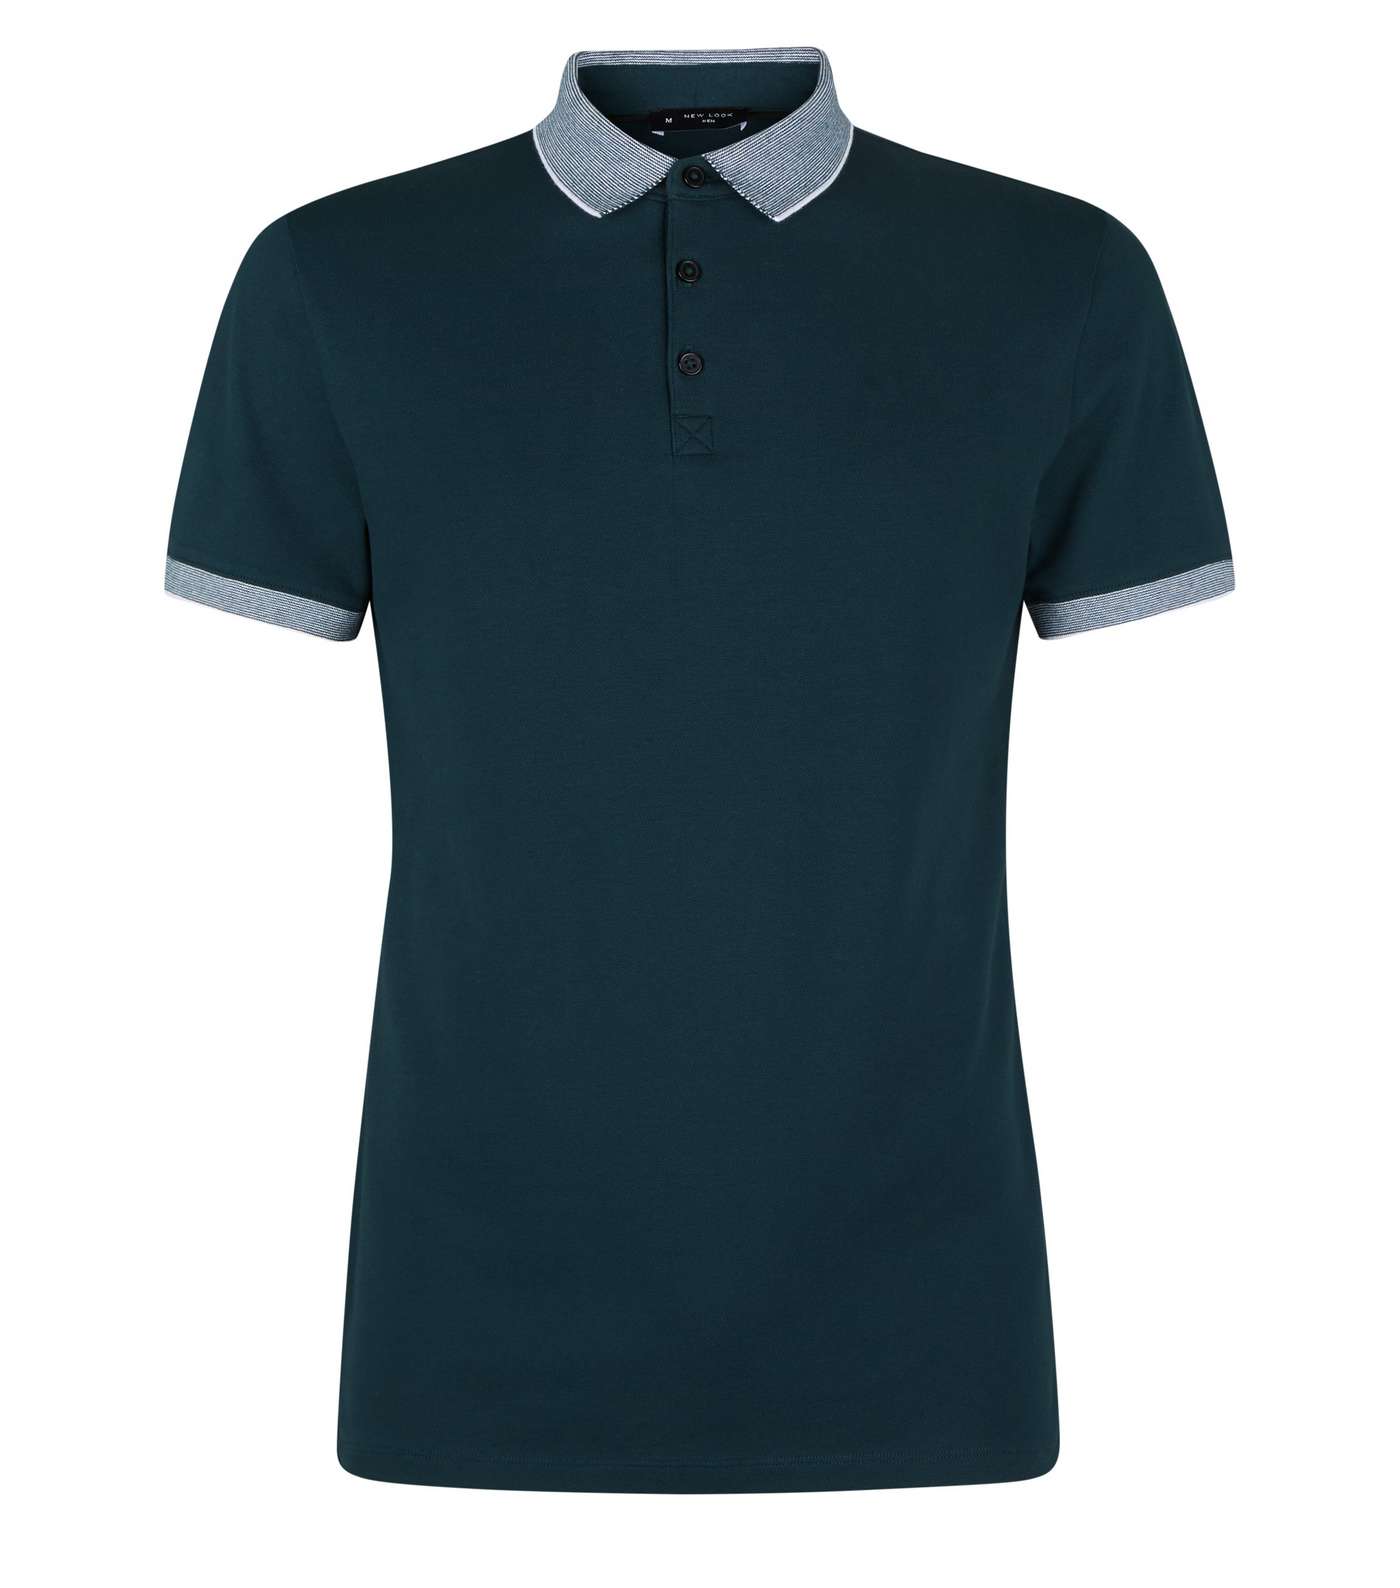 Teal Stripe Collar Muscle Fit Polo Shirt Image 4